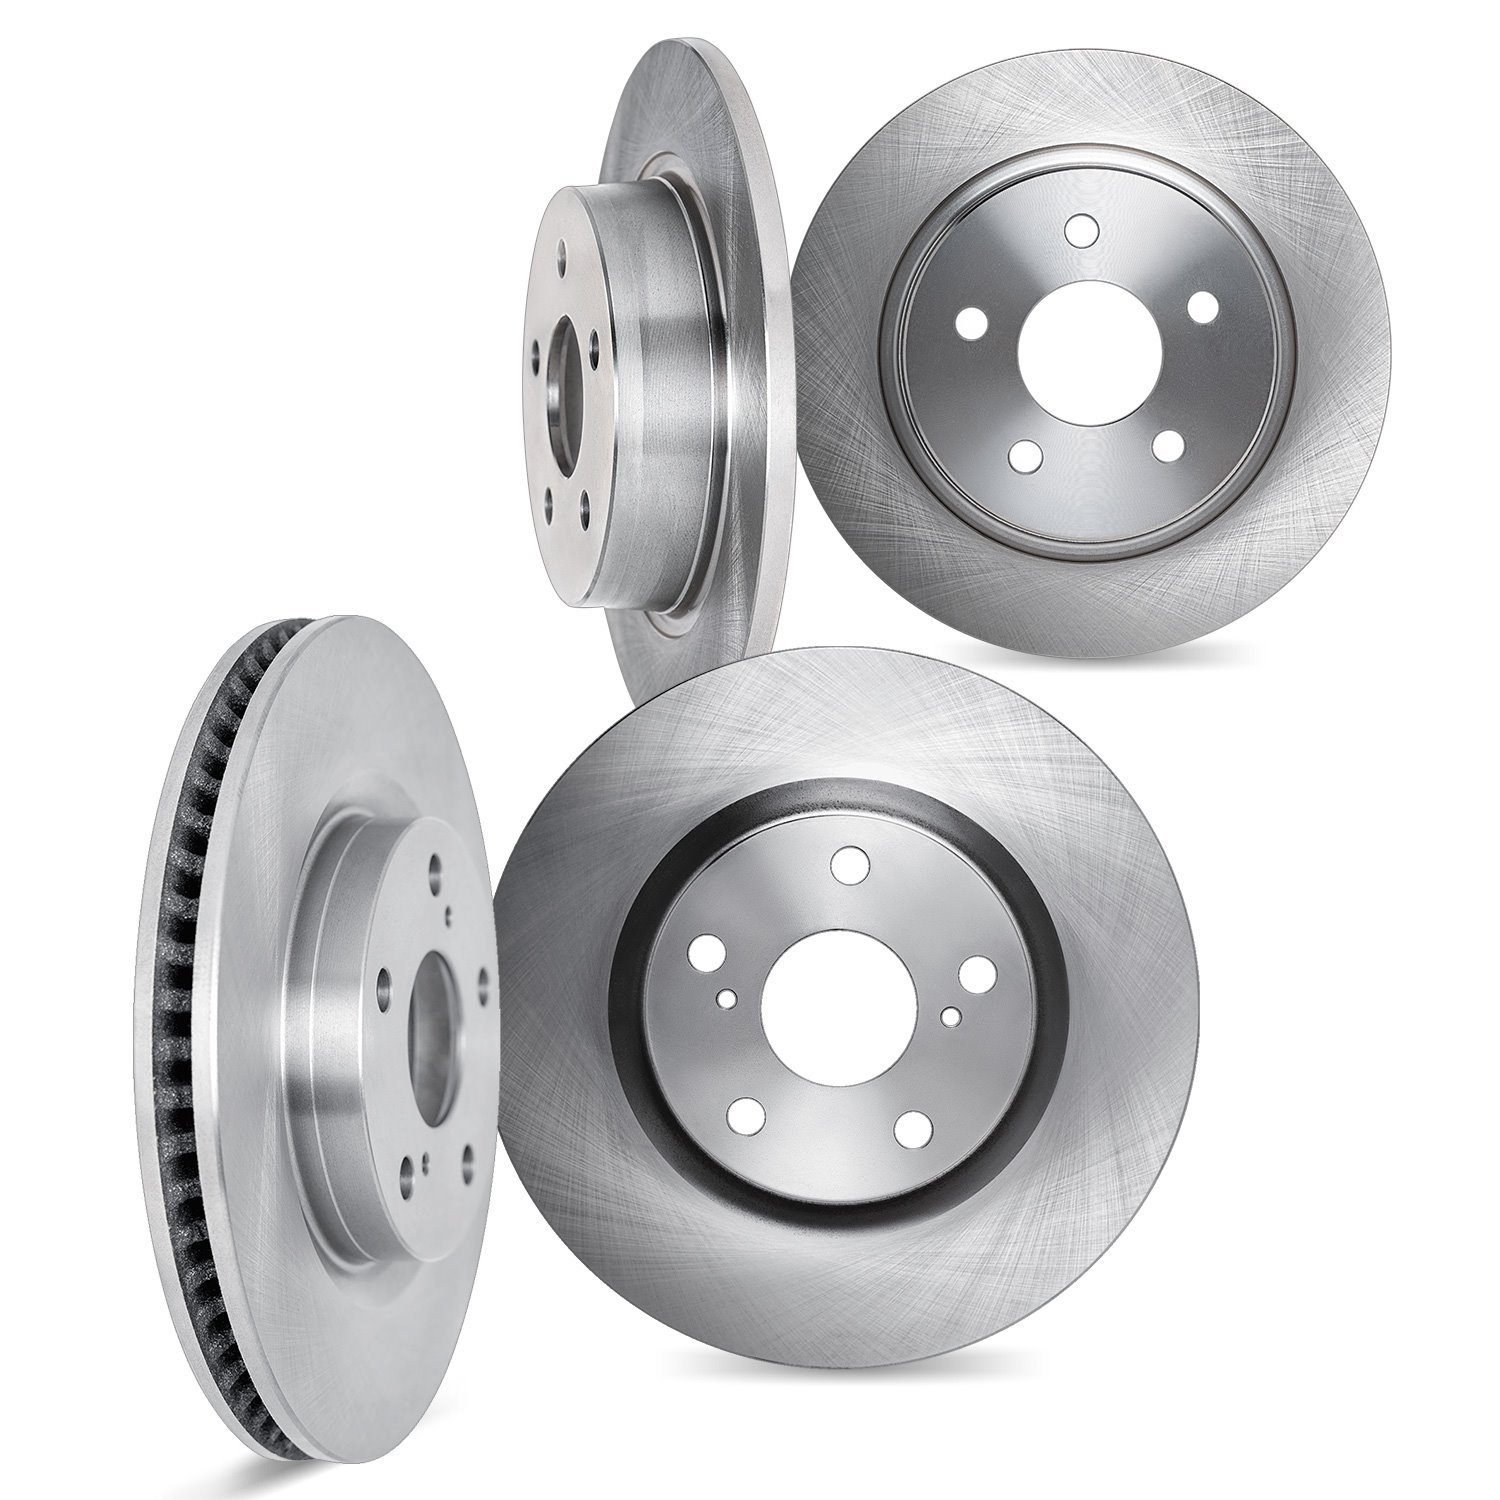 6004-32015 Brake Rotors, Fits Select Mini, Position: Front and Rear